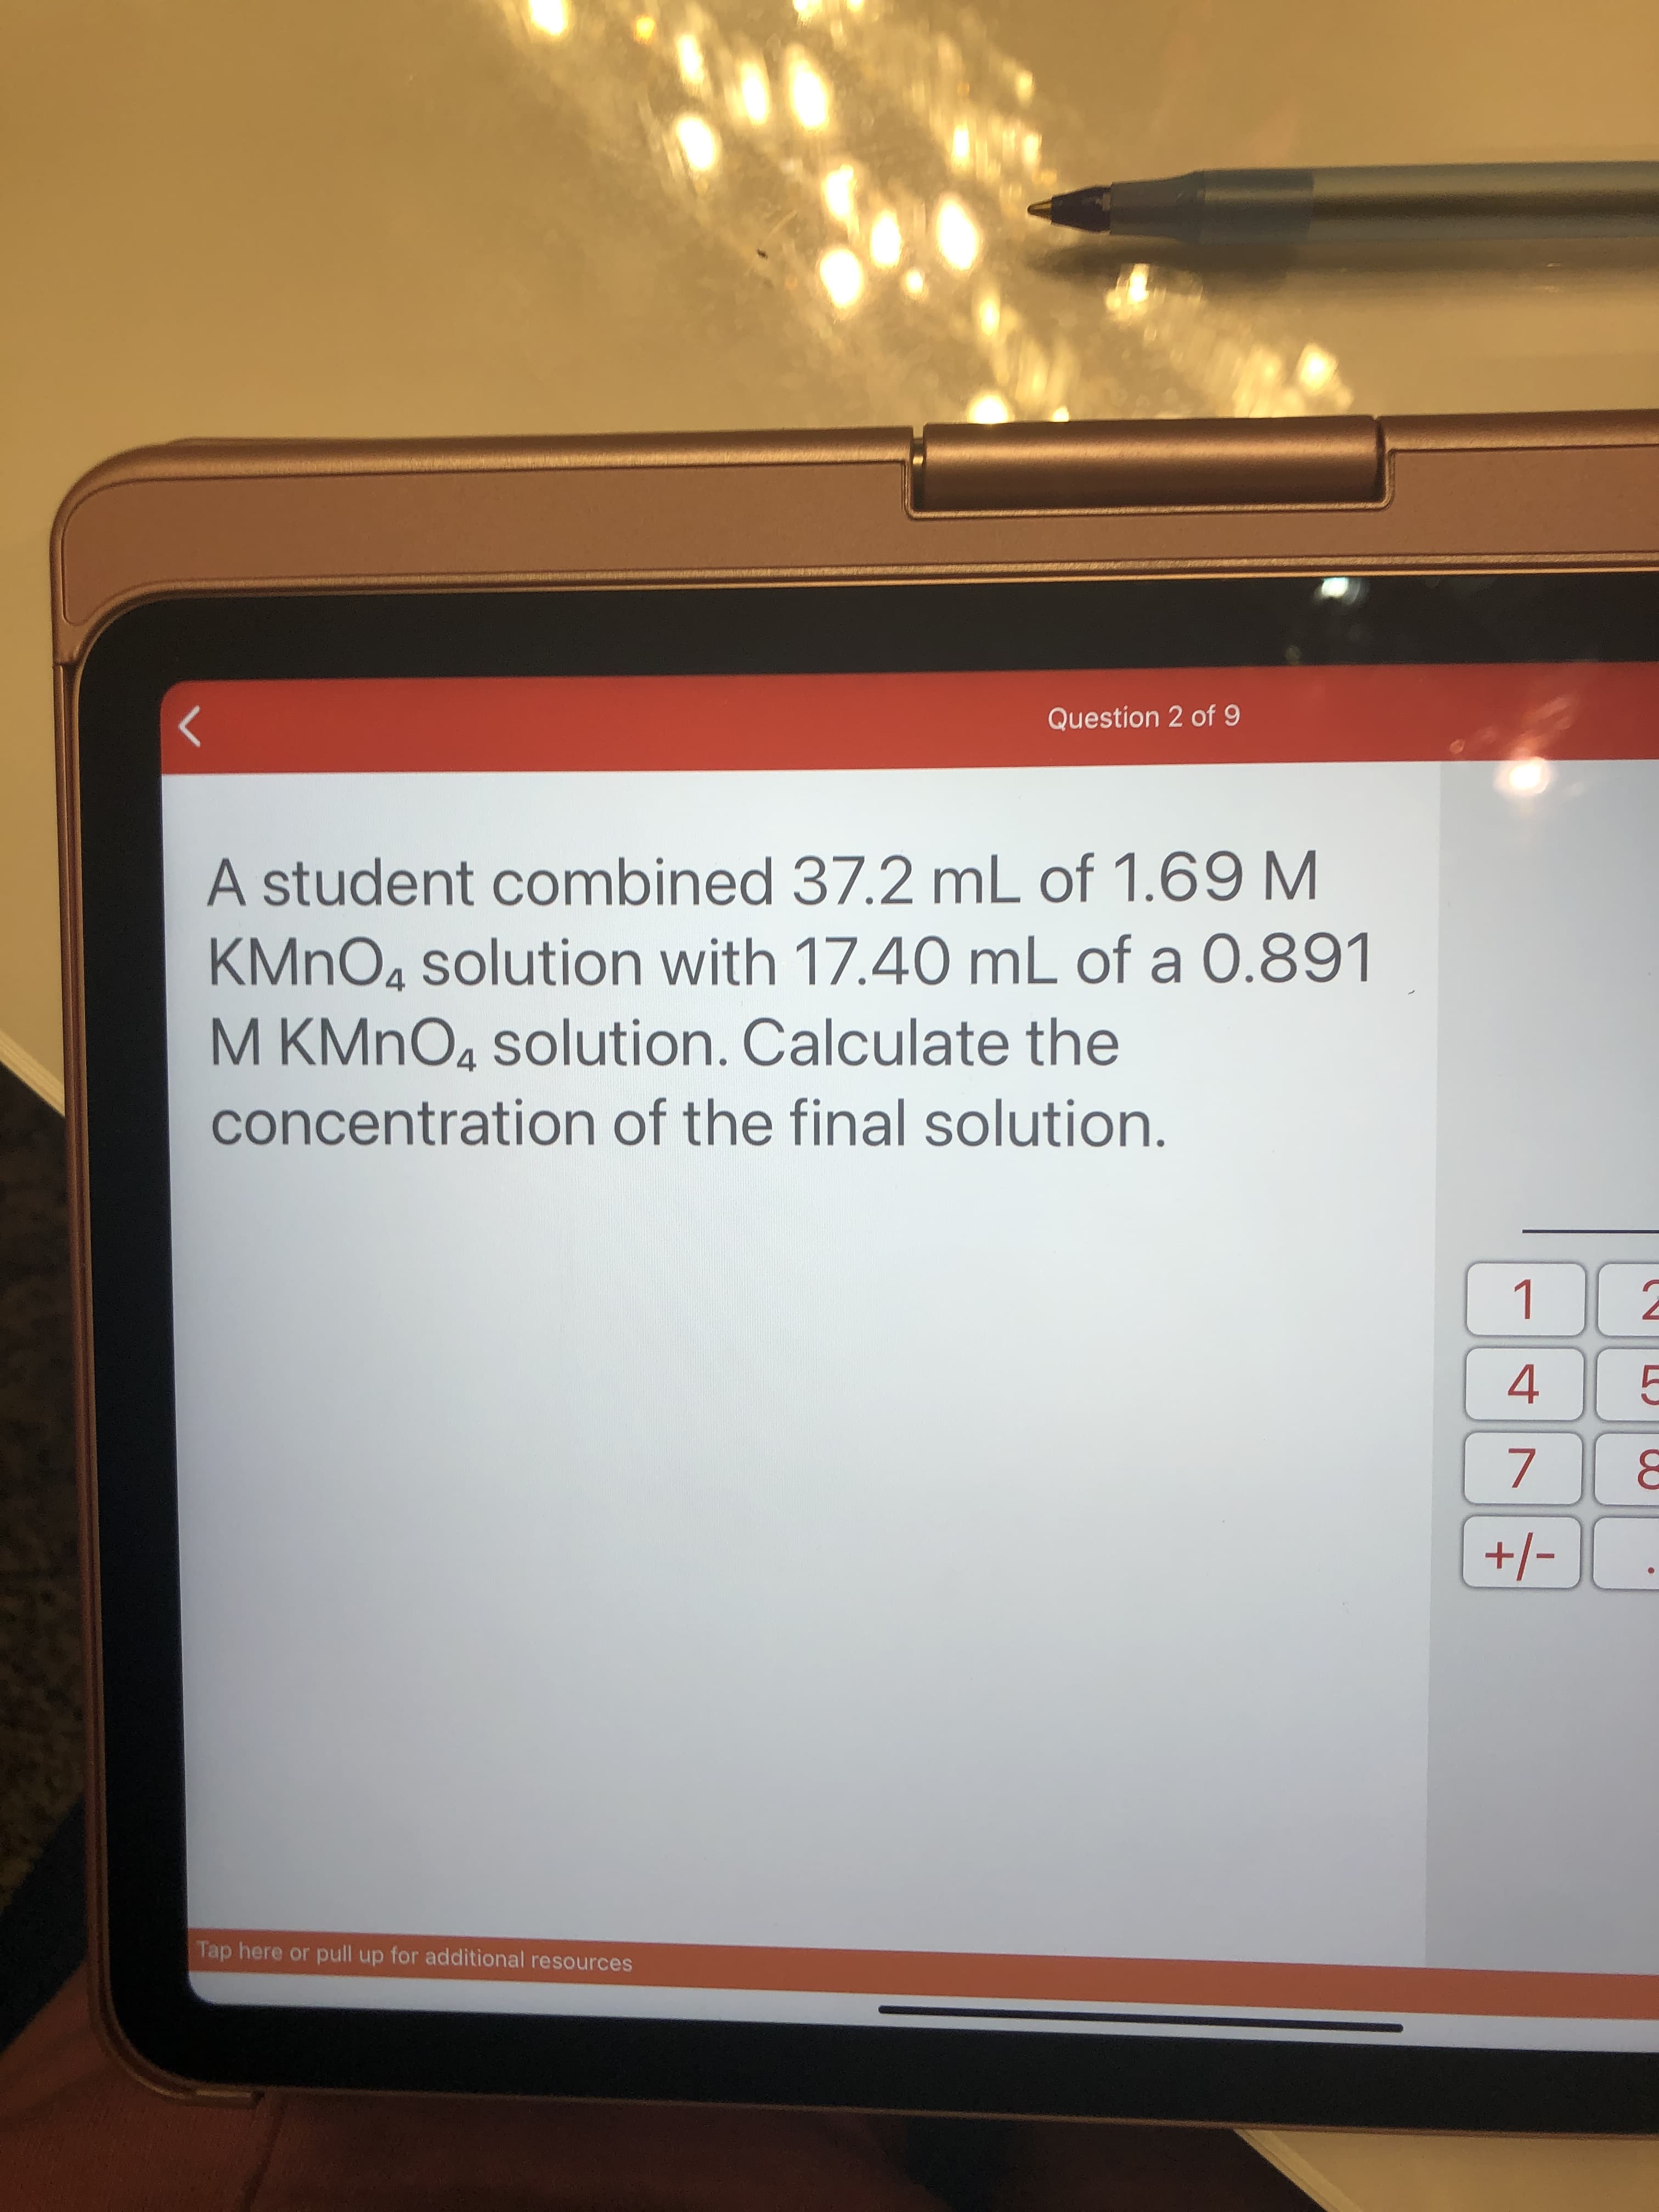 A student combined 37.2 mL of 1.69 M
KMNO4 solution with 17.40 mL of a 0.891
M KMNO, solution. Calculate the
concentration of the final solution.
